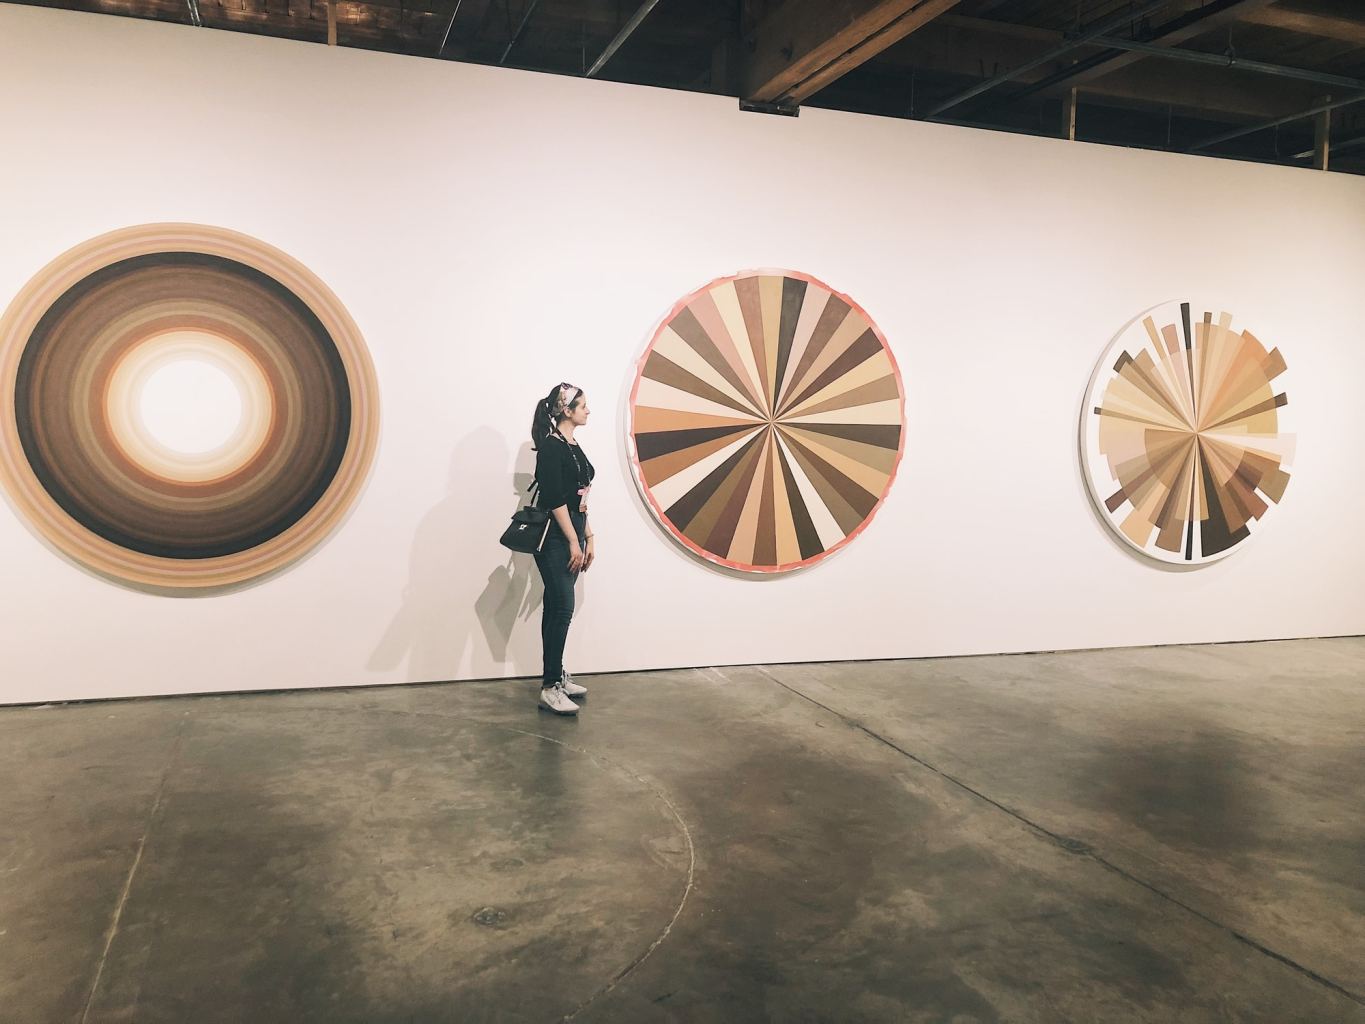 The author stands next to three circular canvases with geometric shapes in earth tones.